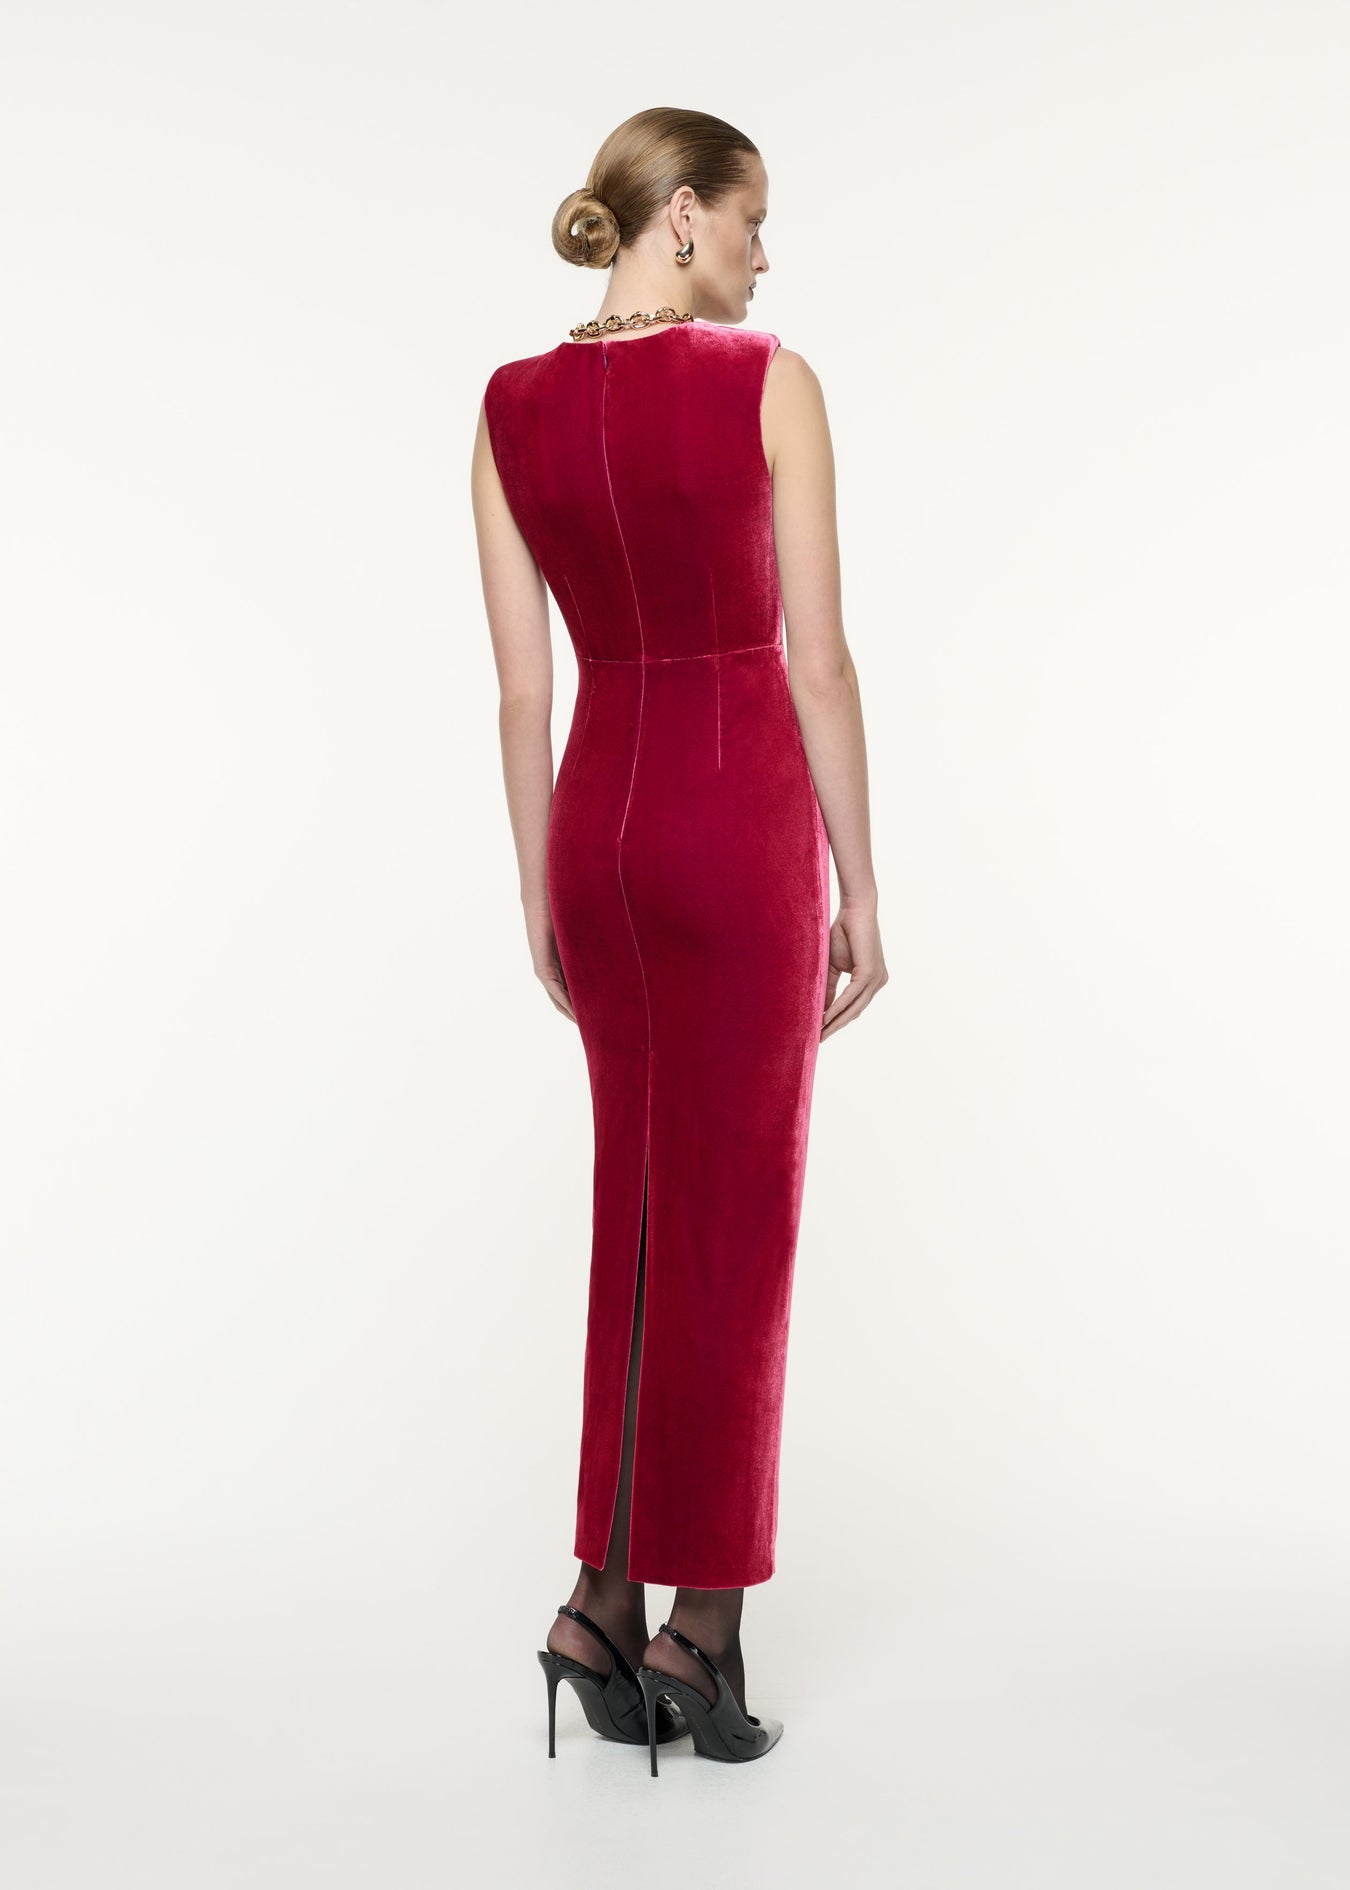 A back view image of a model wearing the Velvet Bow Maxi Dress in Pink